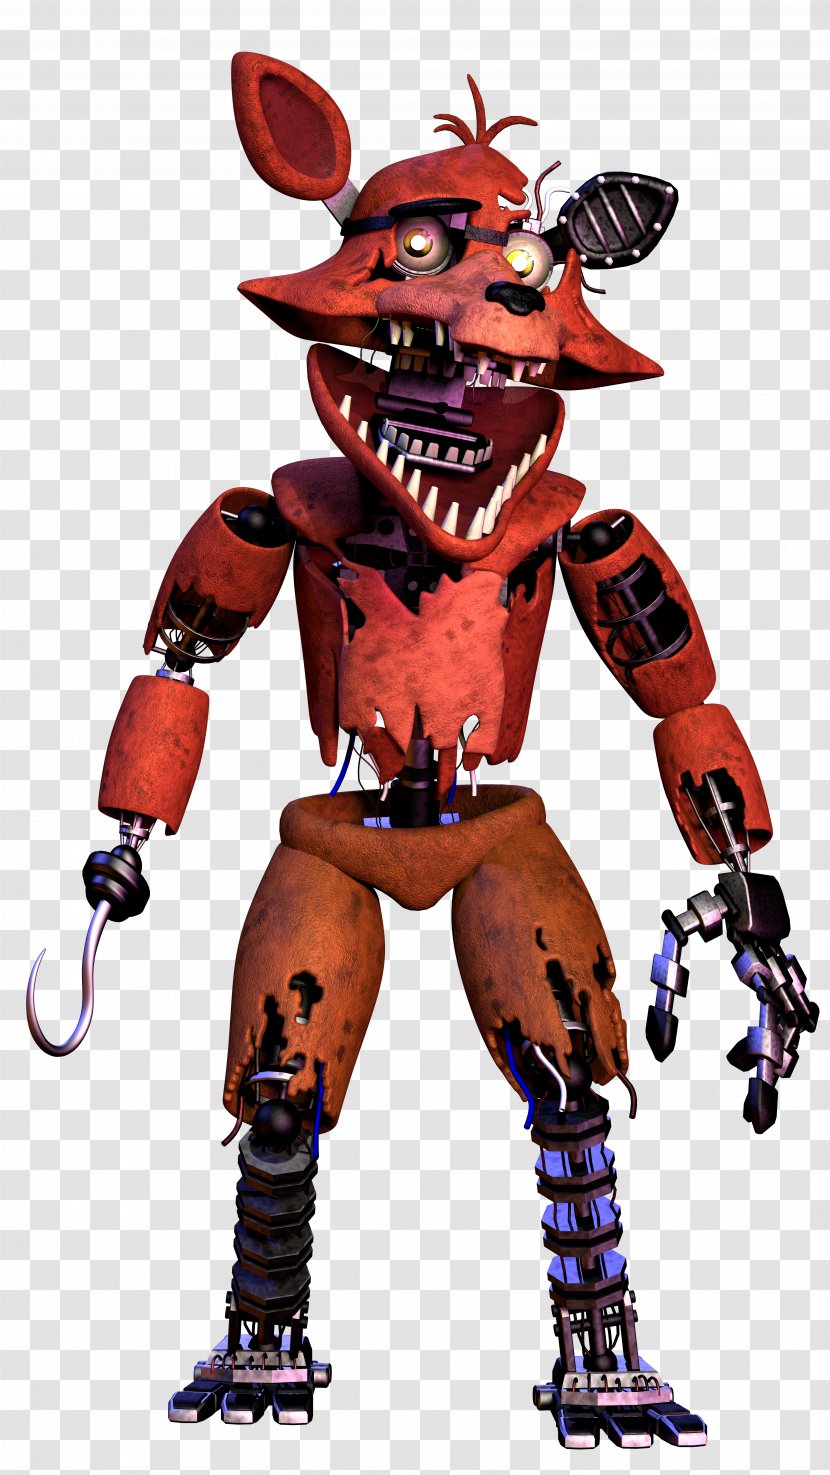 Five Nights At Freddy's 2 Animatronics Endoskeleton Art - Action Figure - Nightmare Foxy Transparent PNG